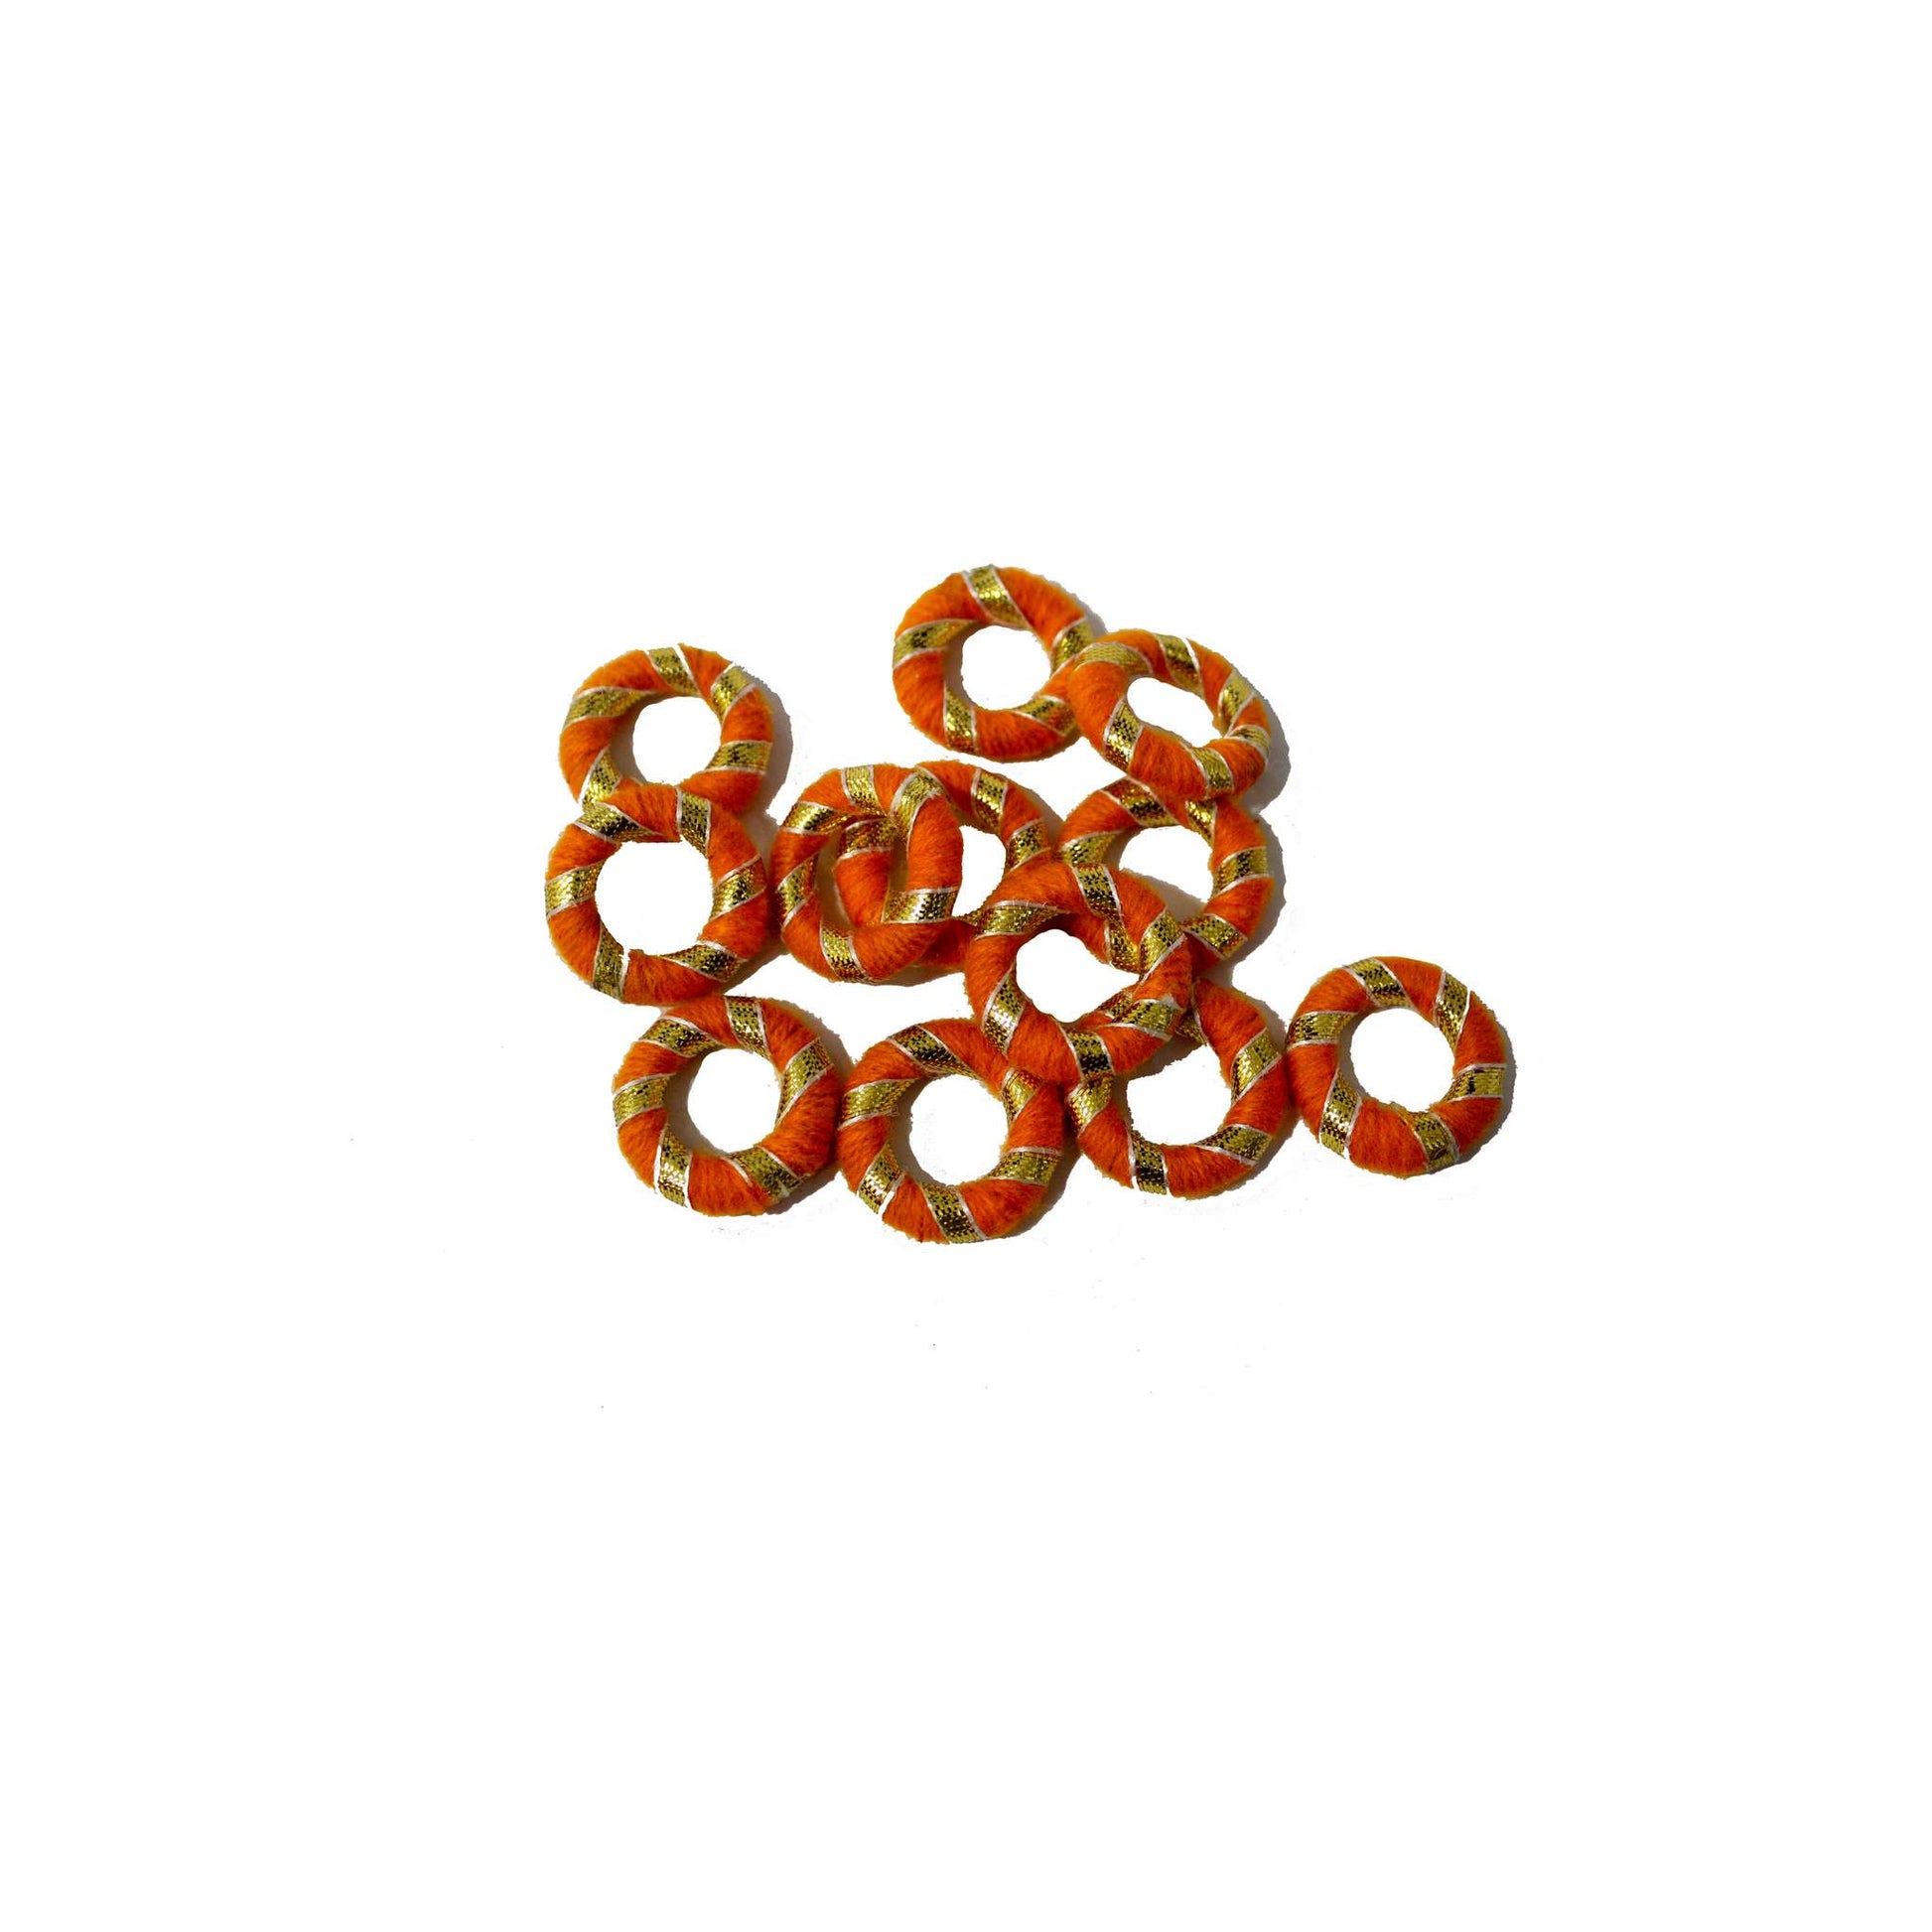 Indian Petals Threaded Round Bangle with Gota Motif for Craft Trousseau Packing Decoration - Design 552, Small, Orange